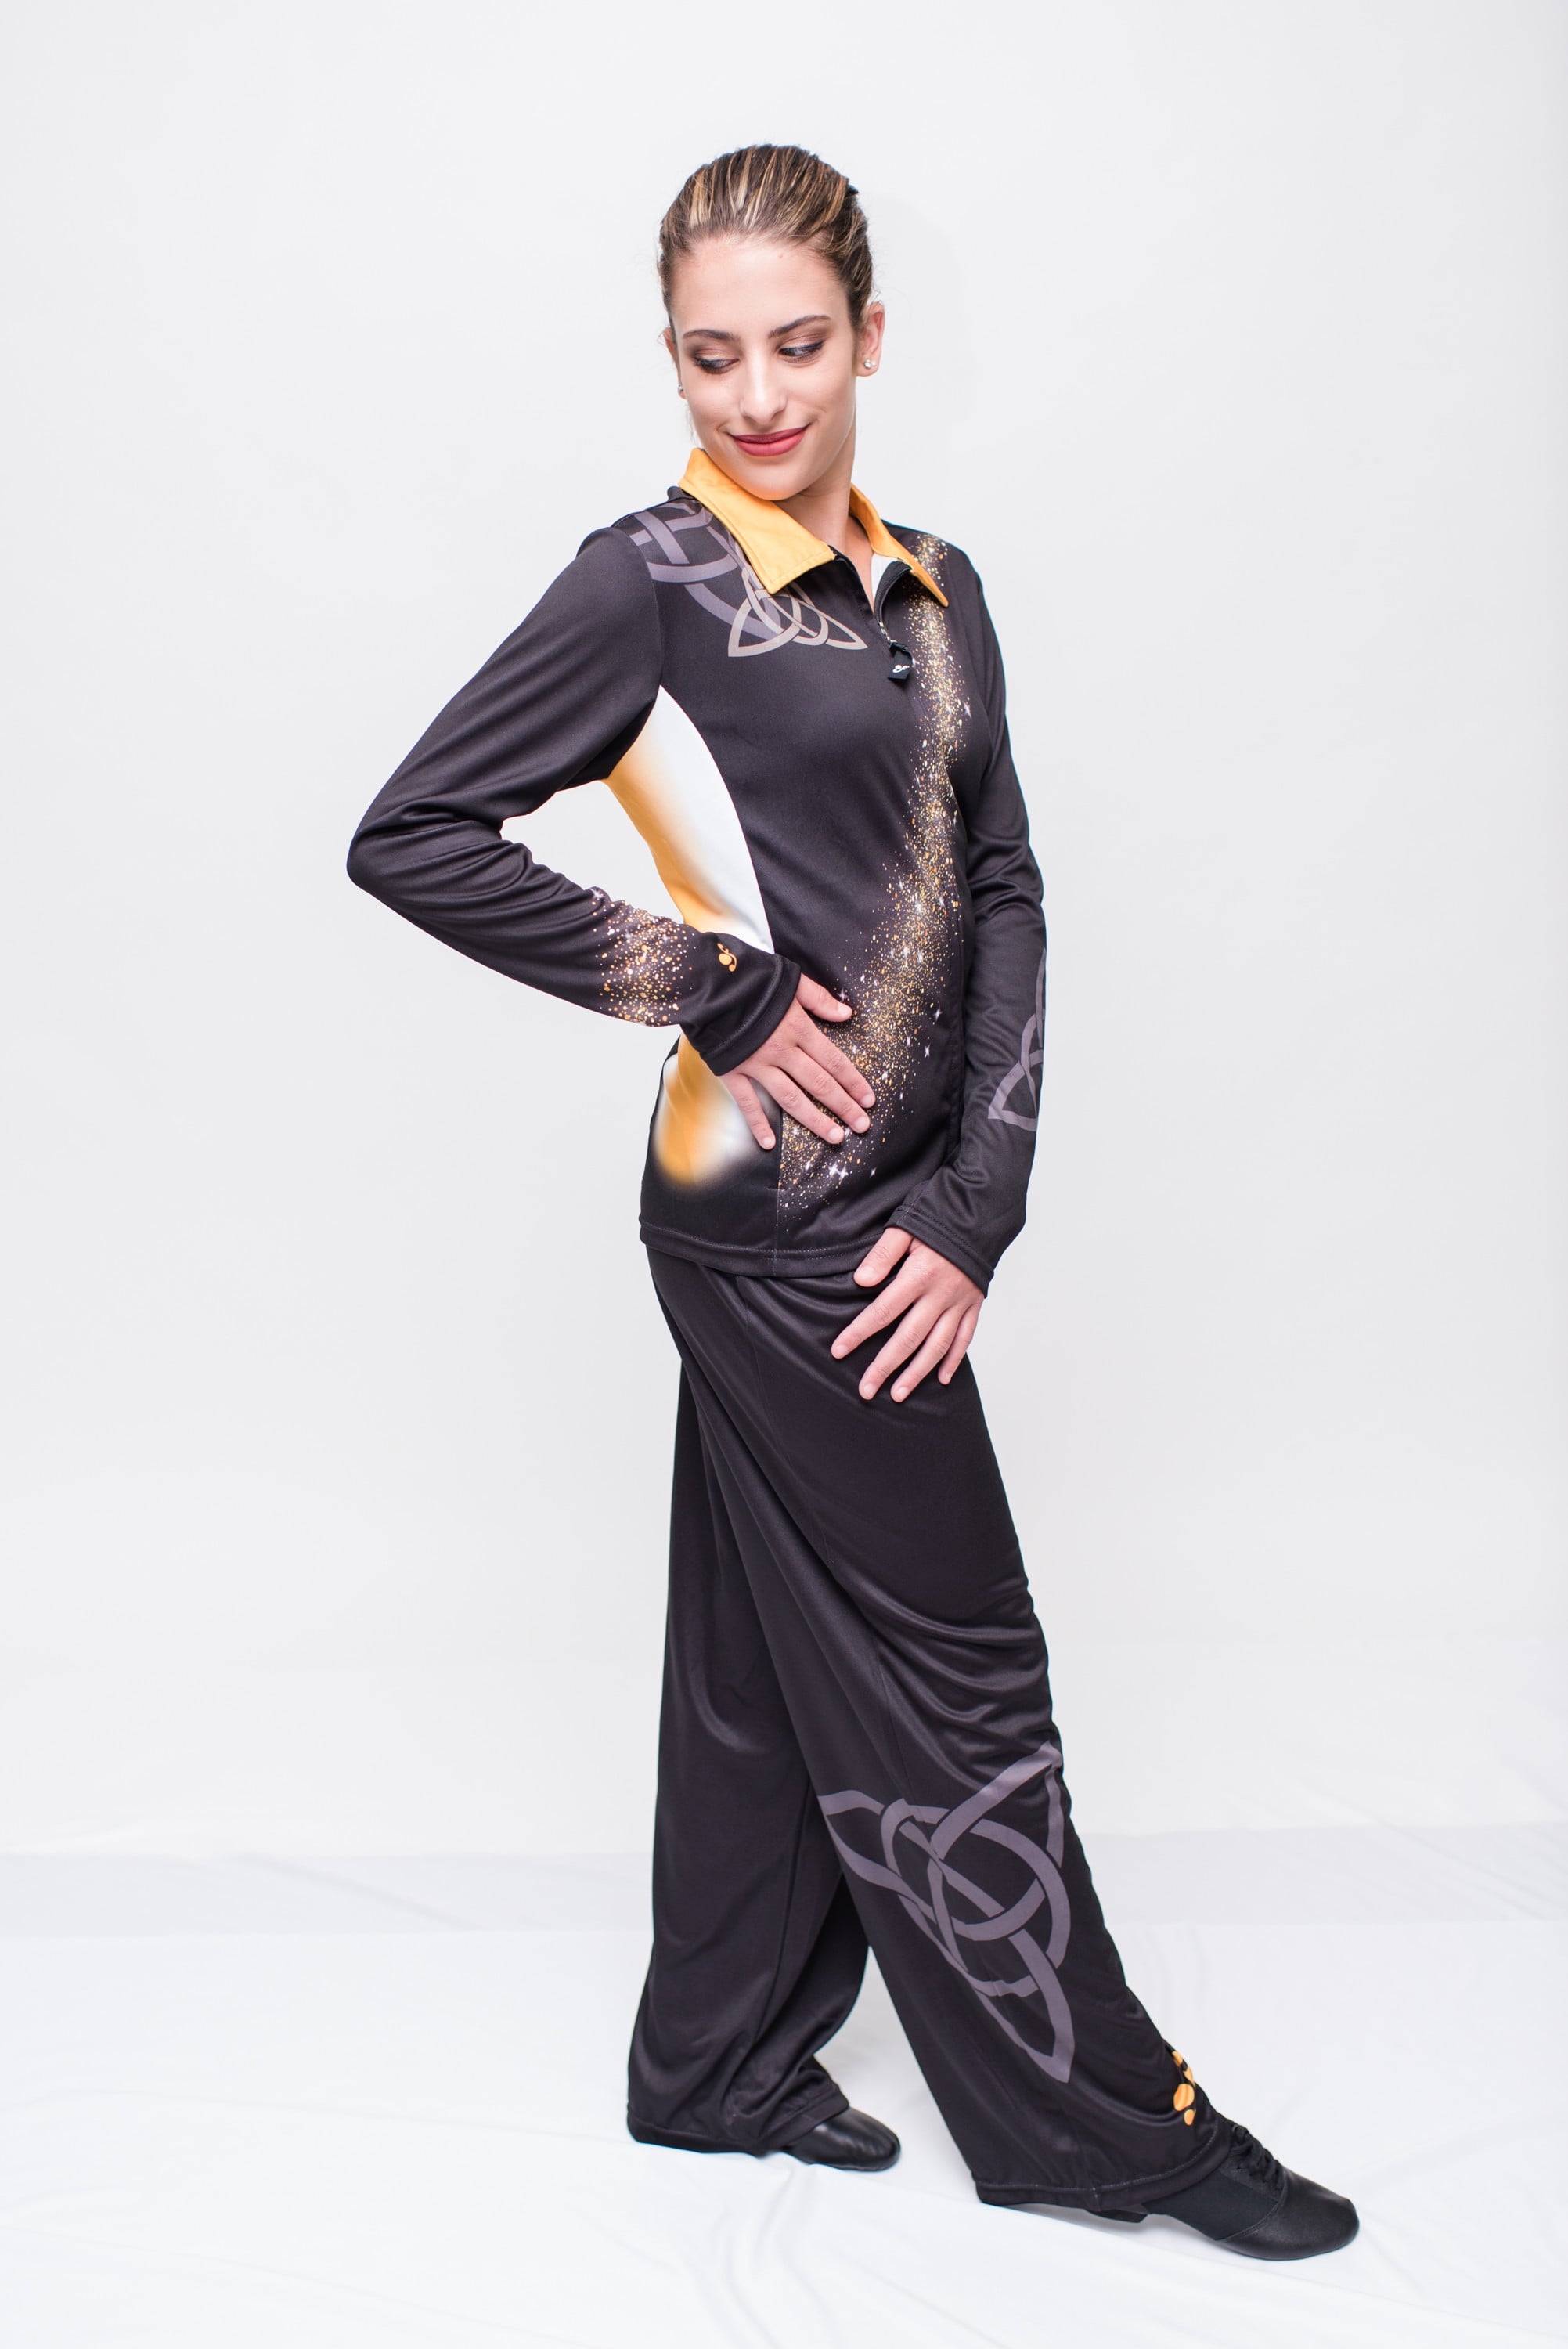 Dance Jacket in Ocen Blue, Susnet Yellow, Black and White -A real Showstopper!